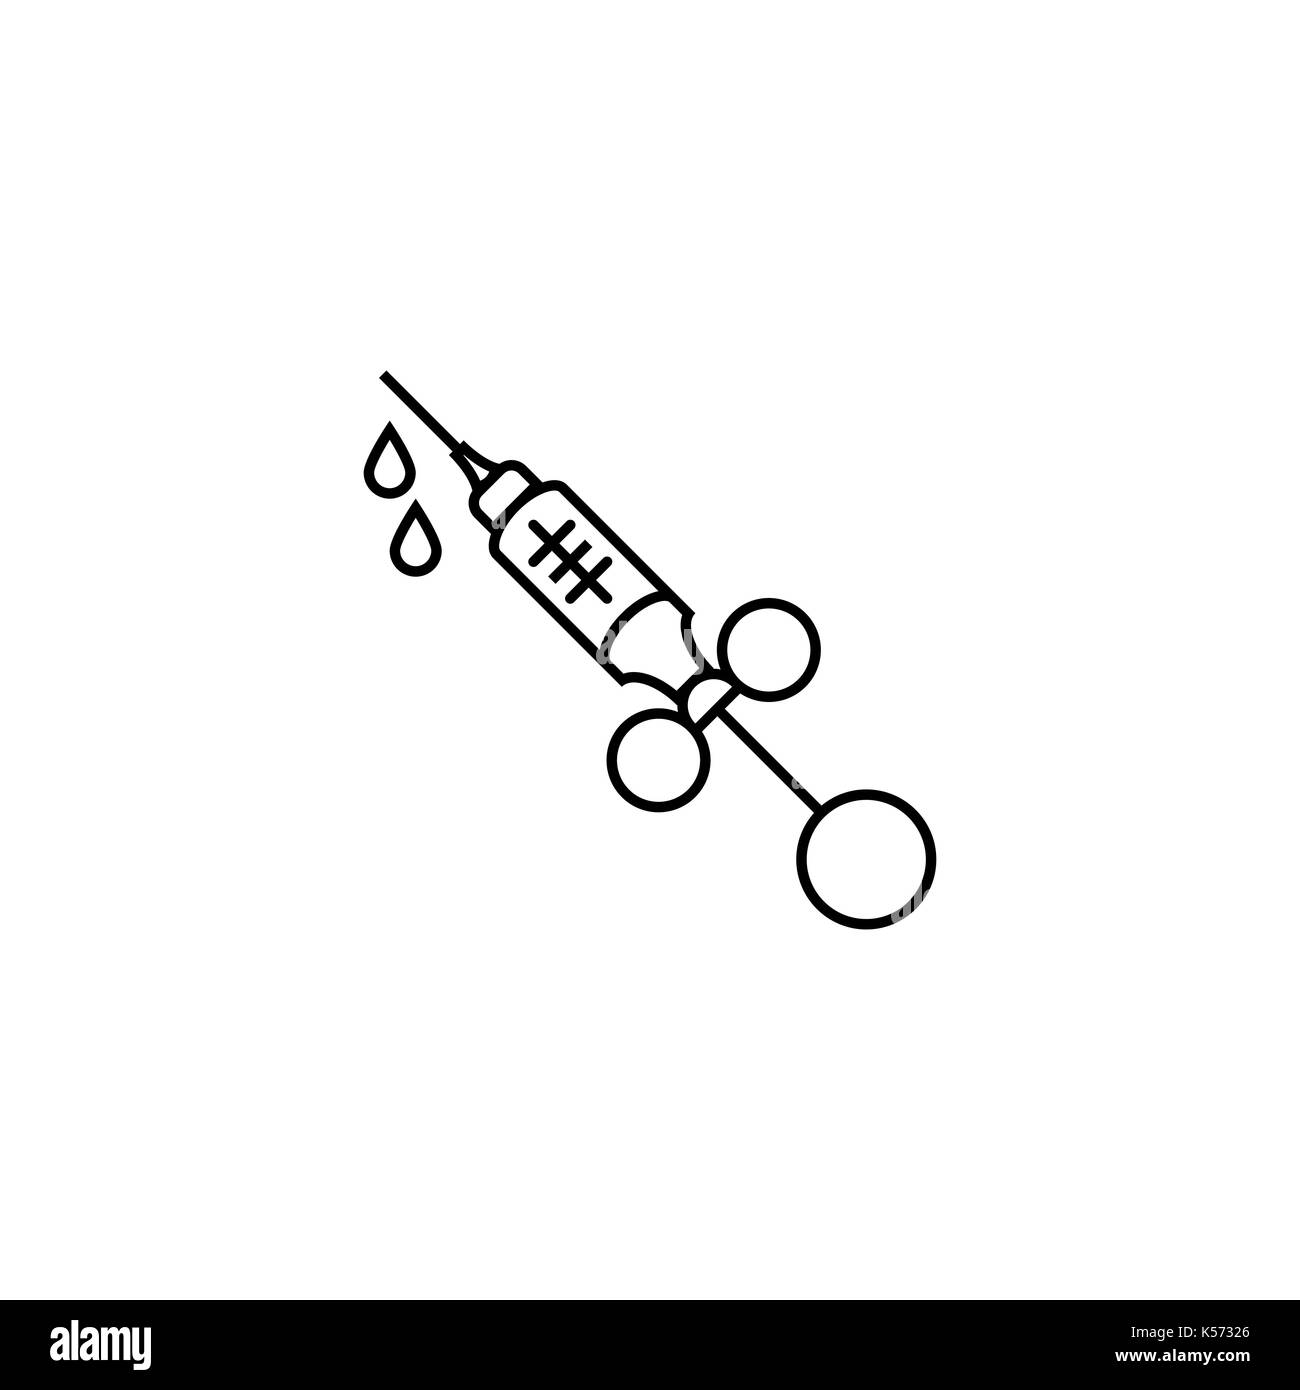 Syringe Icon isolated on white background. Thin line vector illustration. Stock Vector